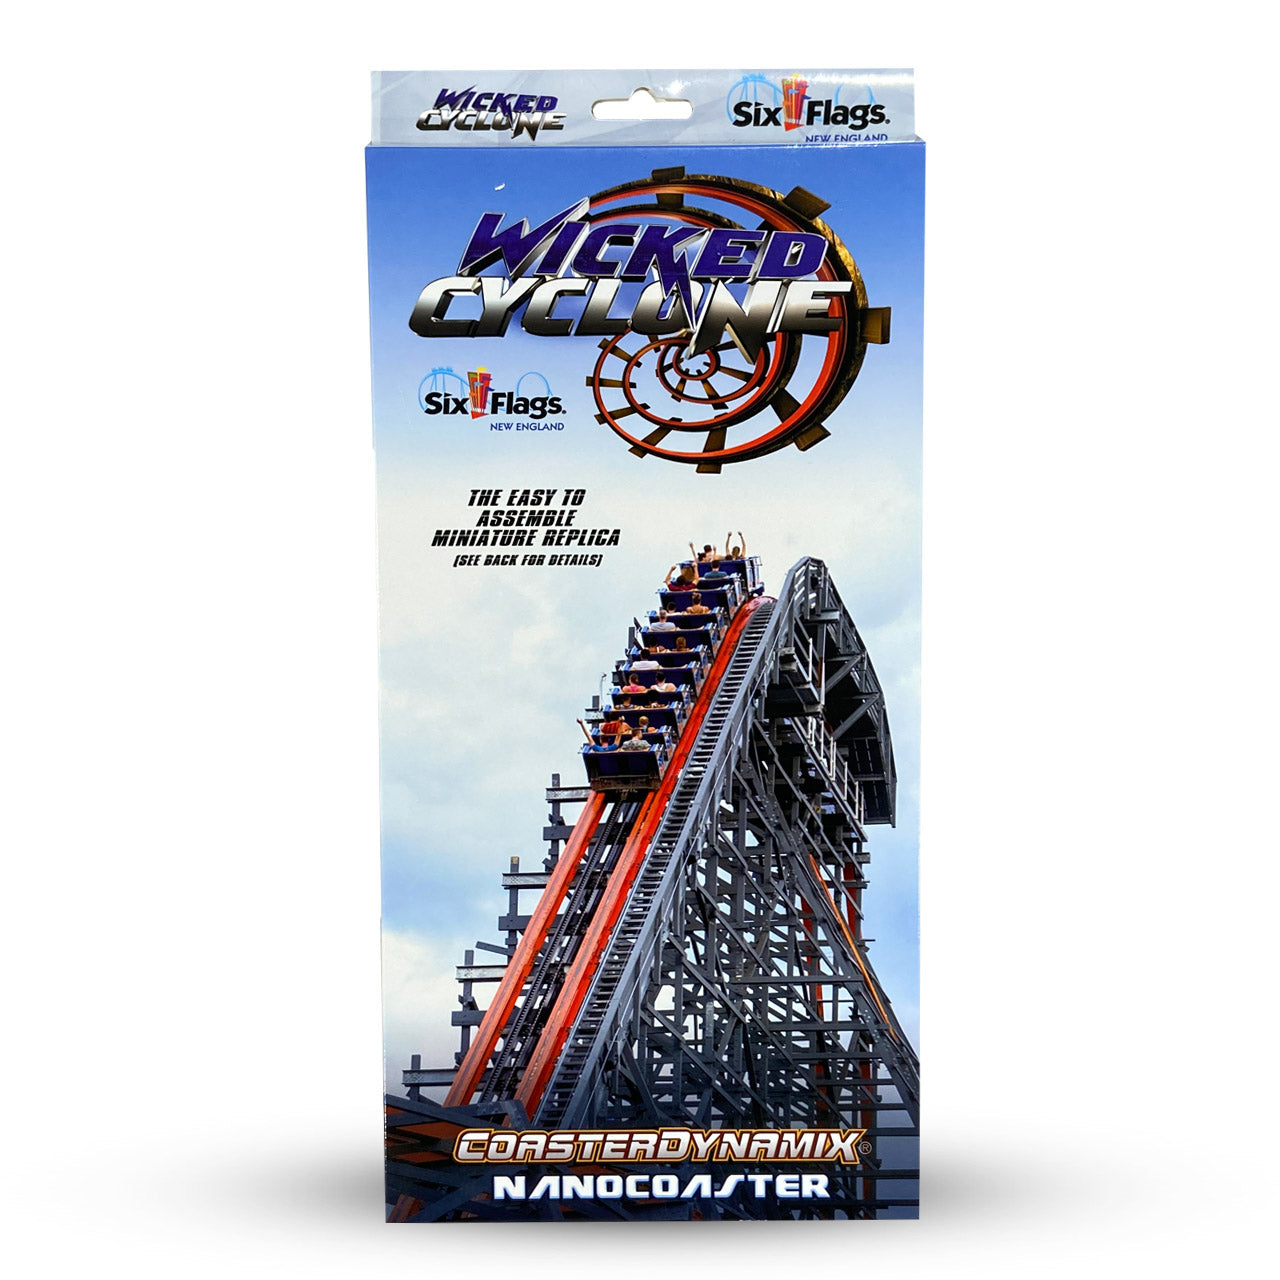 WICKED CYCLONE SIX FLAGS NEW ENGLAND SIX FLAGS NANOCOASTER PACKAGE